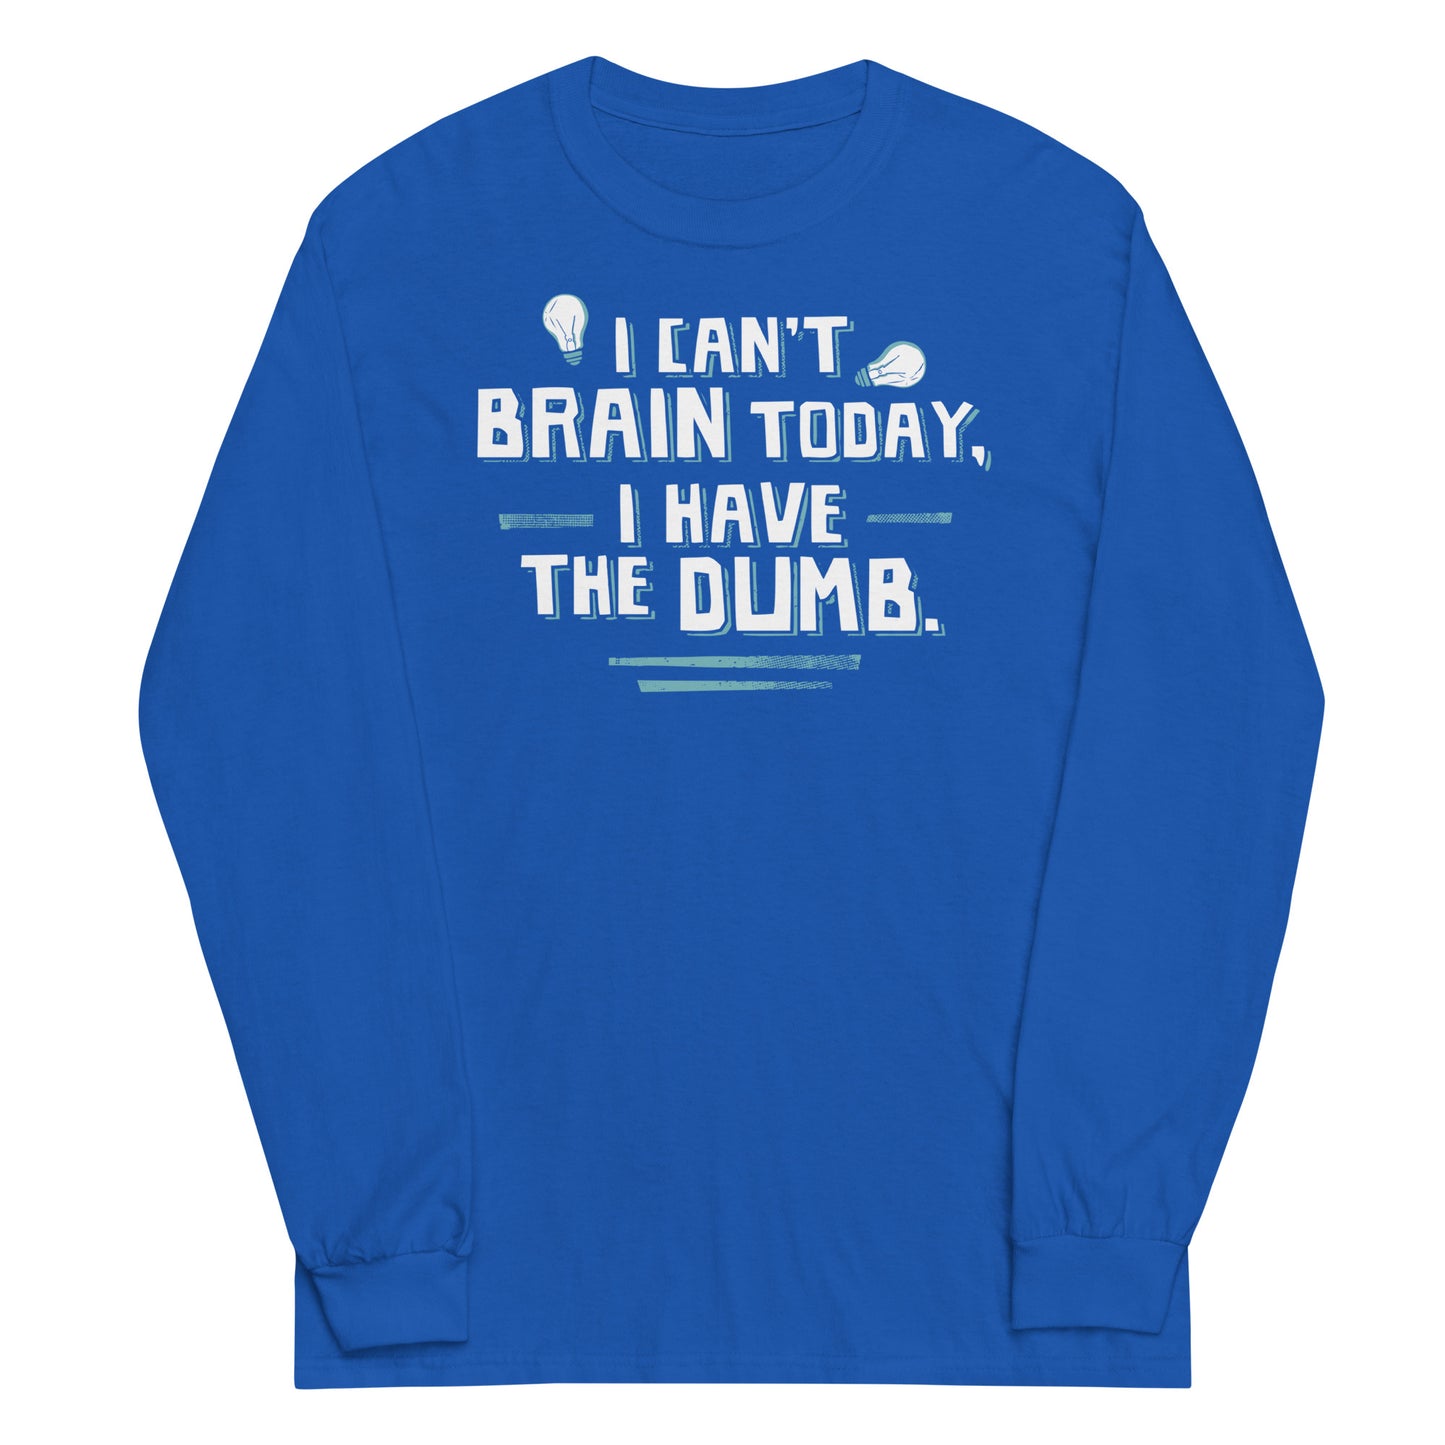 I Can't Brain Today, I Have The Dumb. Unisex Long Sleeve Tee